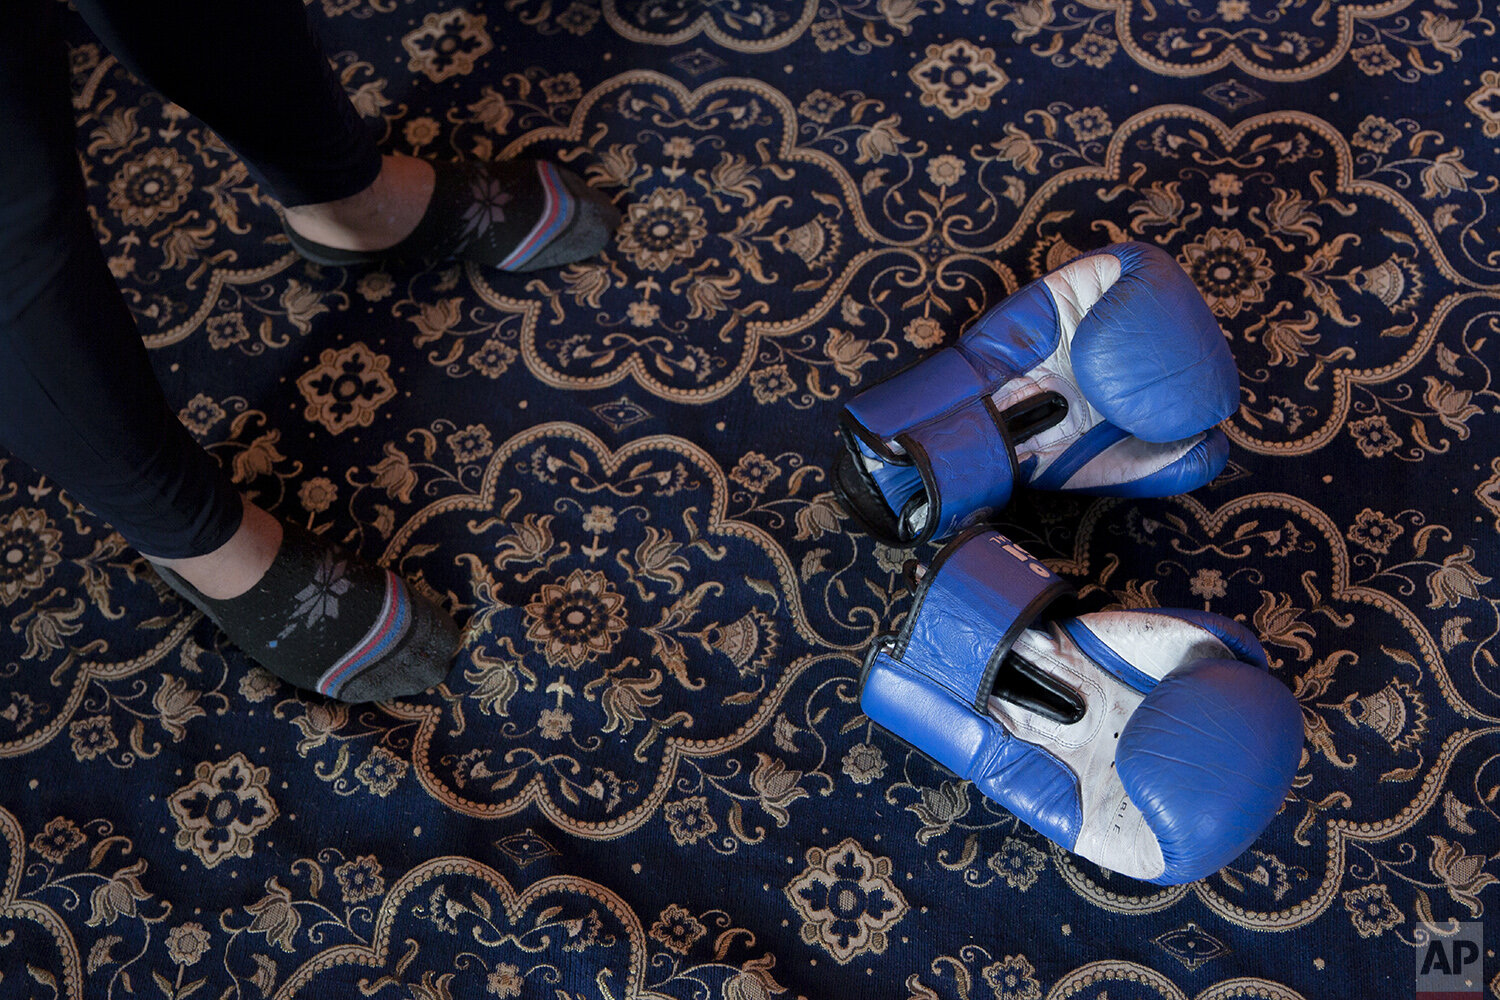  Boxing gloves of Eyed Akeel Khan lie on the floor of the room where he practices in Srinagar, Indian controlled Kashmir, April 23, 2020. Like many other athletes, the coronavirus pandemic has restricted Khan to his home. But lockdown for the 7 milli